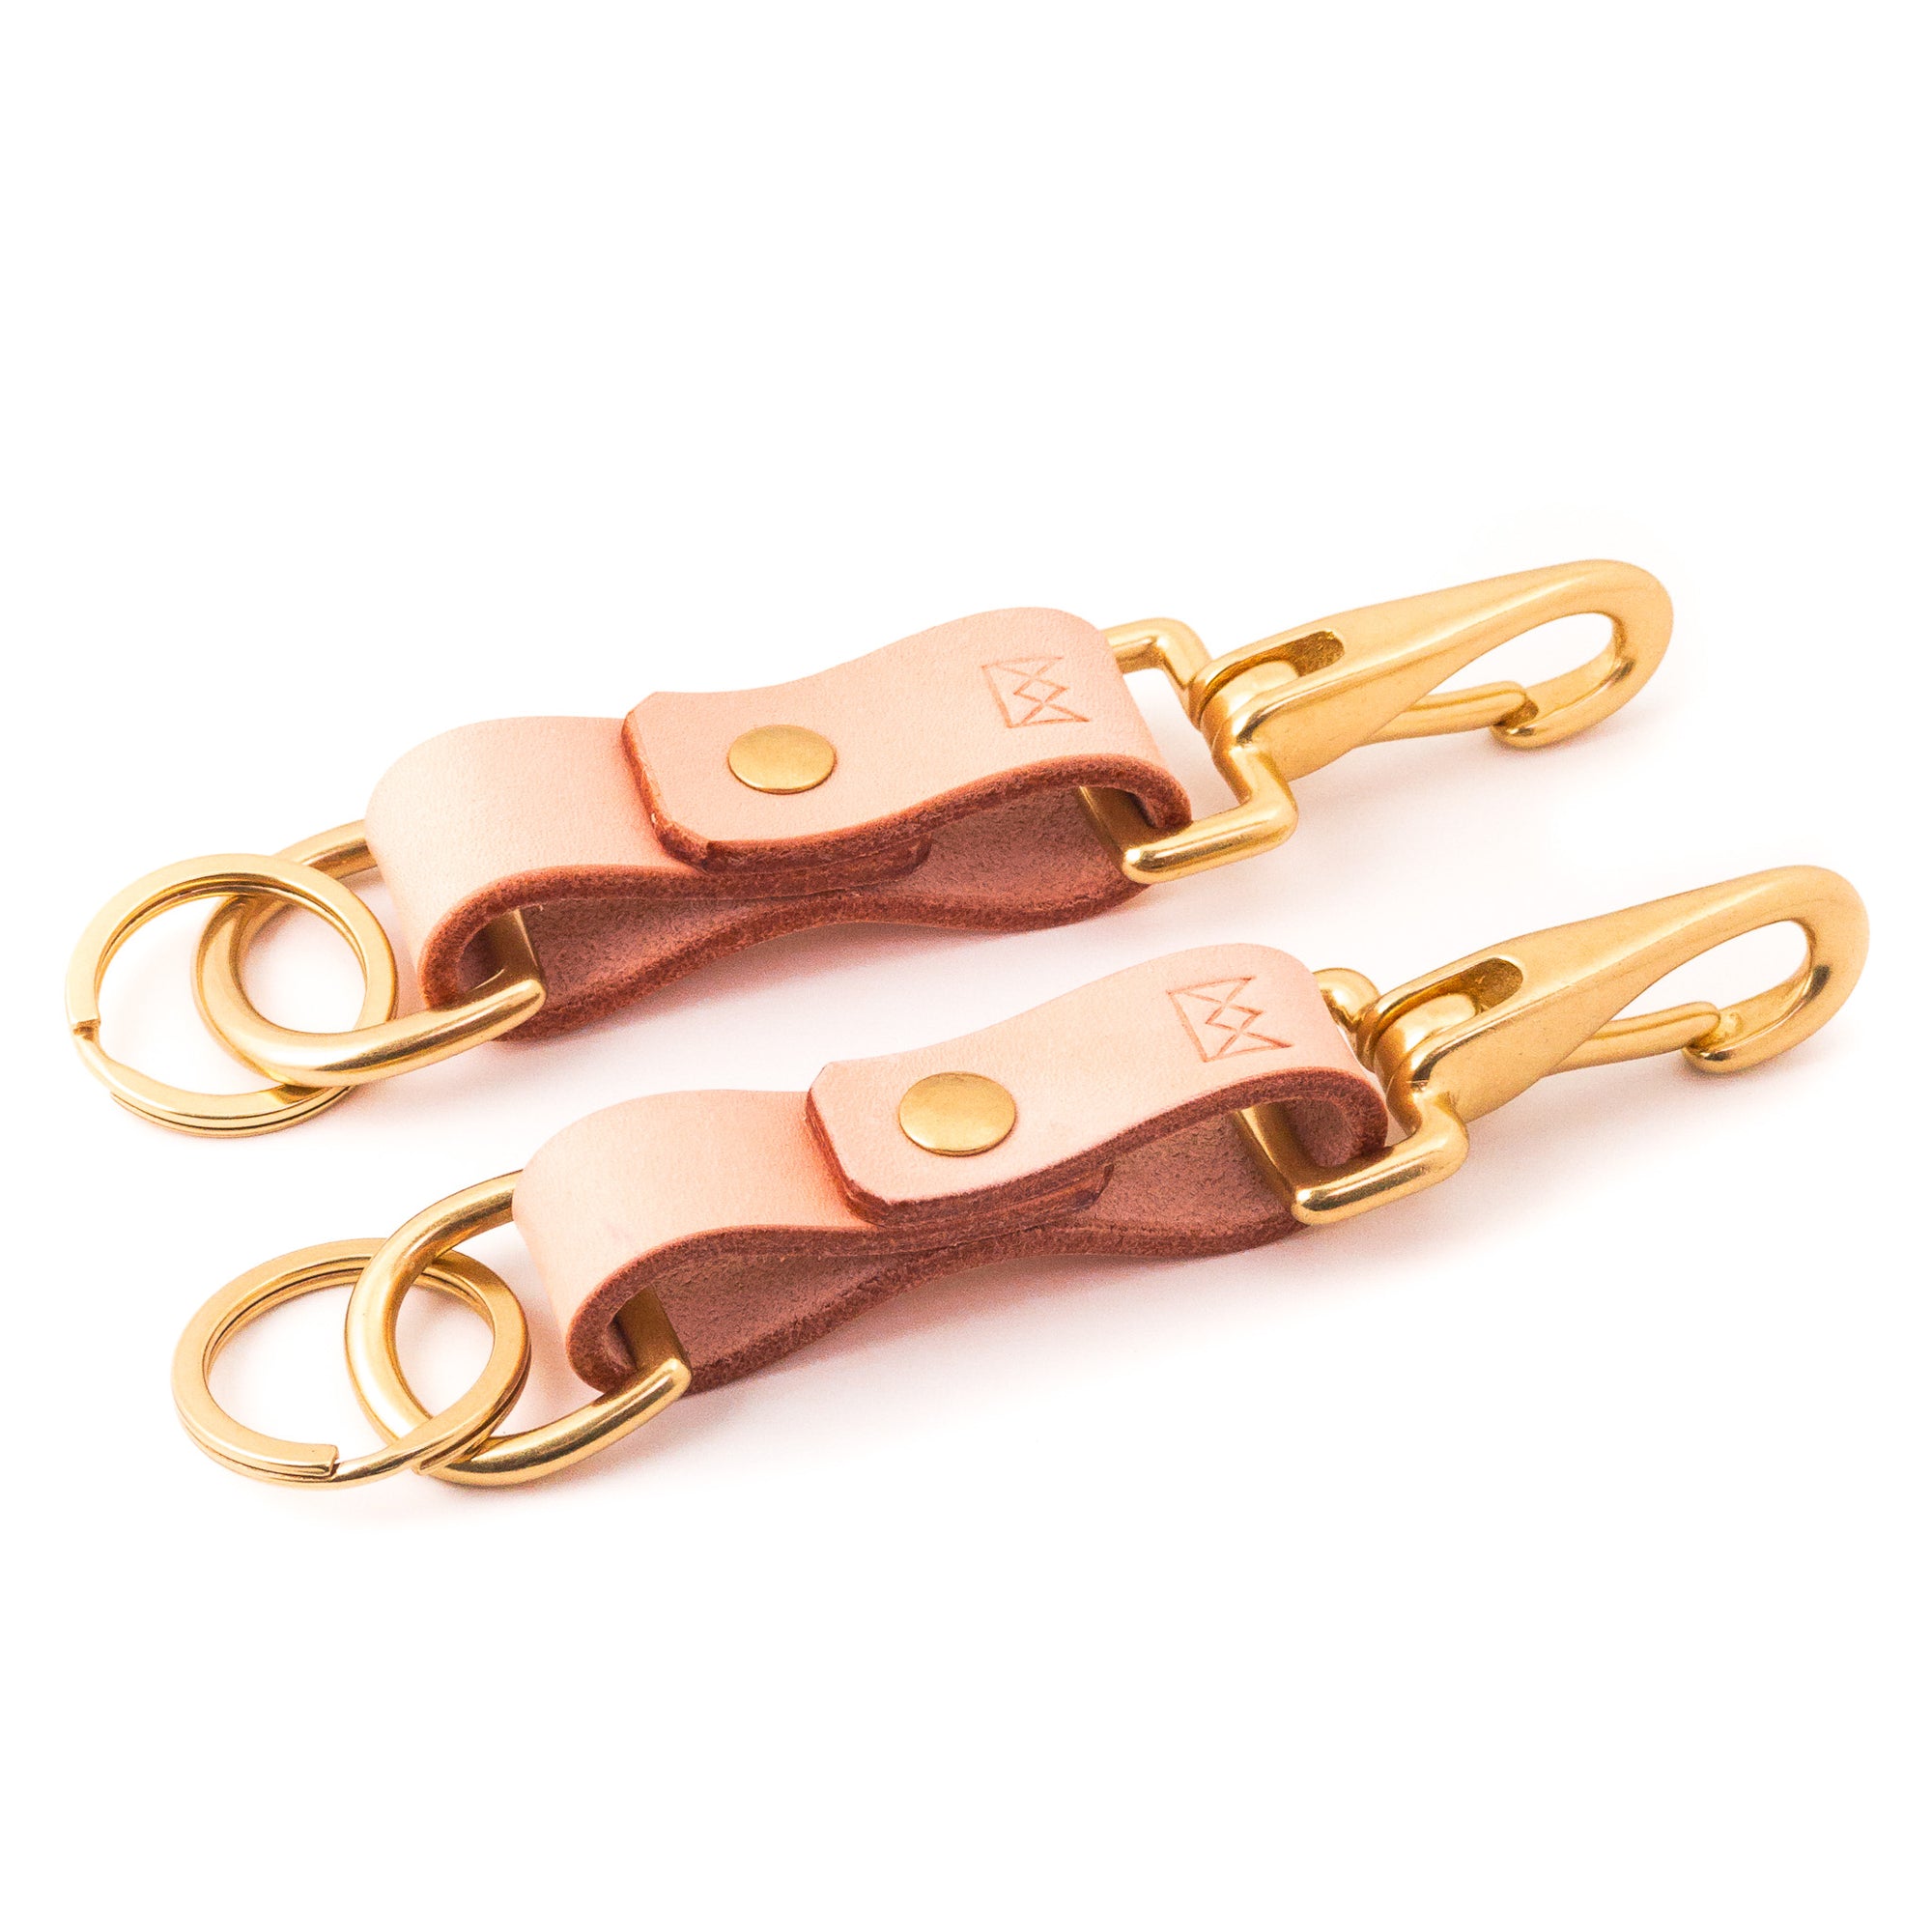 Kingston Barn Nude VegTan Leather Keychain with Solid-Brass Equestrian Halter Snap